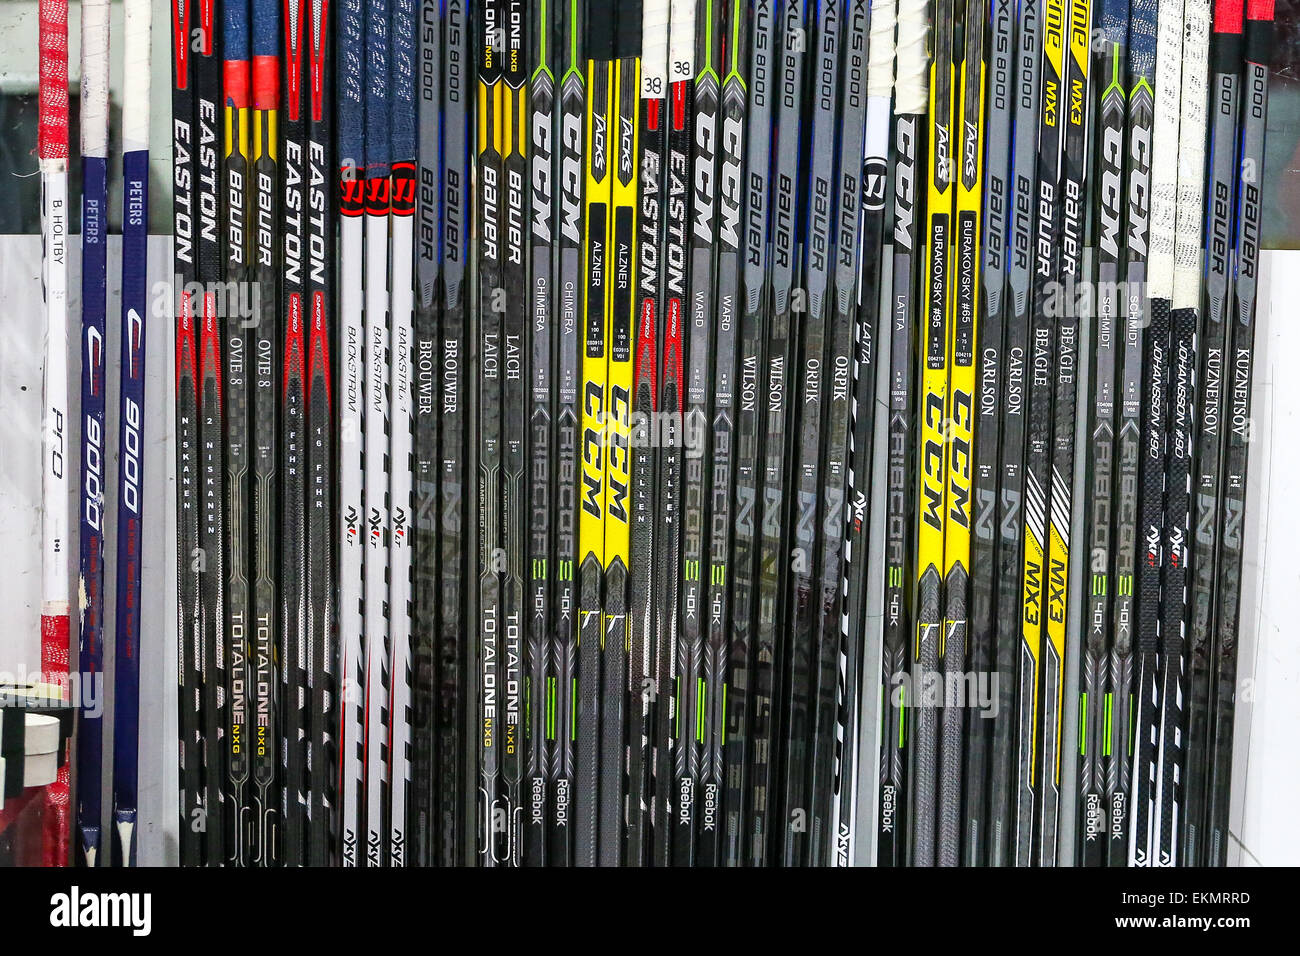 Washington Capitals hockey sticks during the NHL game between the Washington Capitals and the Carolina Hurricanes at the PNC Arena. The Washington Capitals defeated the Carolina Hurricanes 2-1. Stock Photo